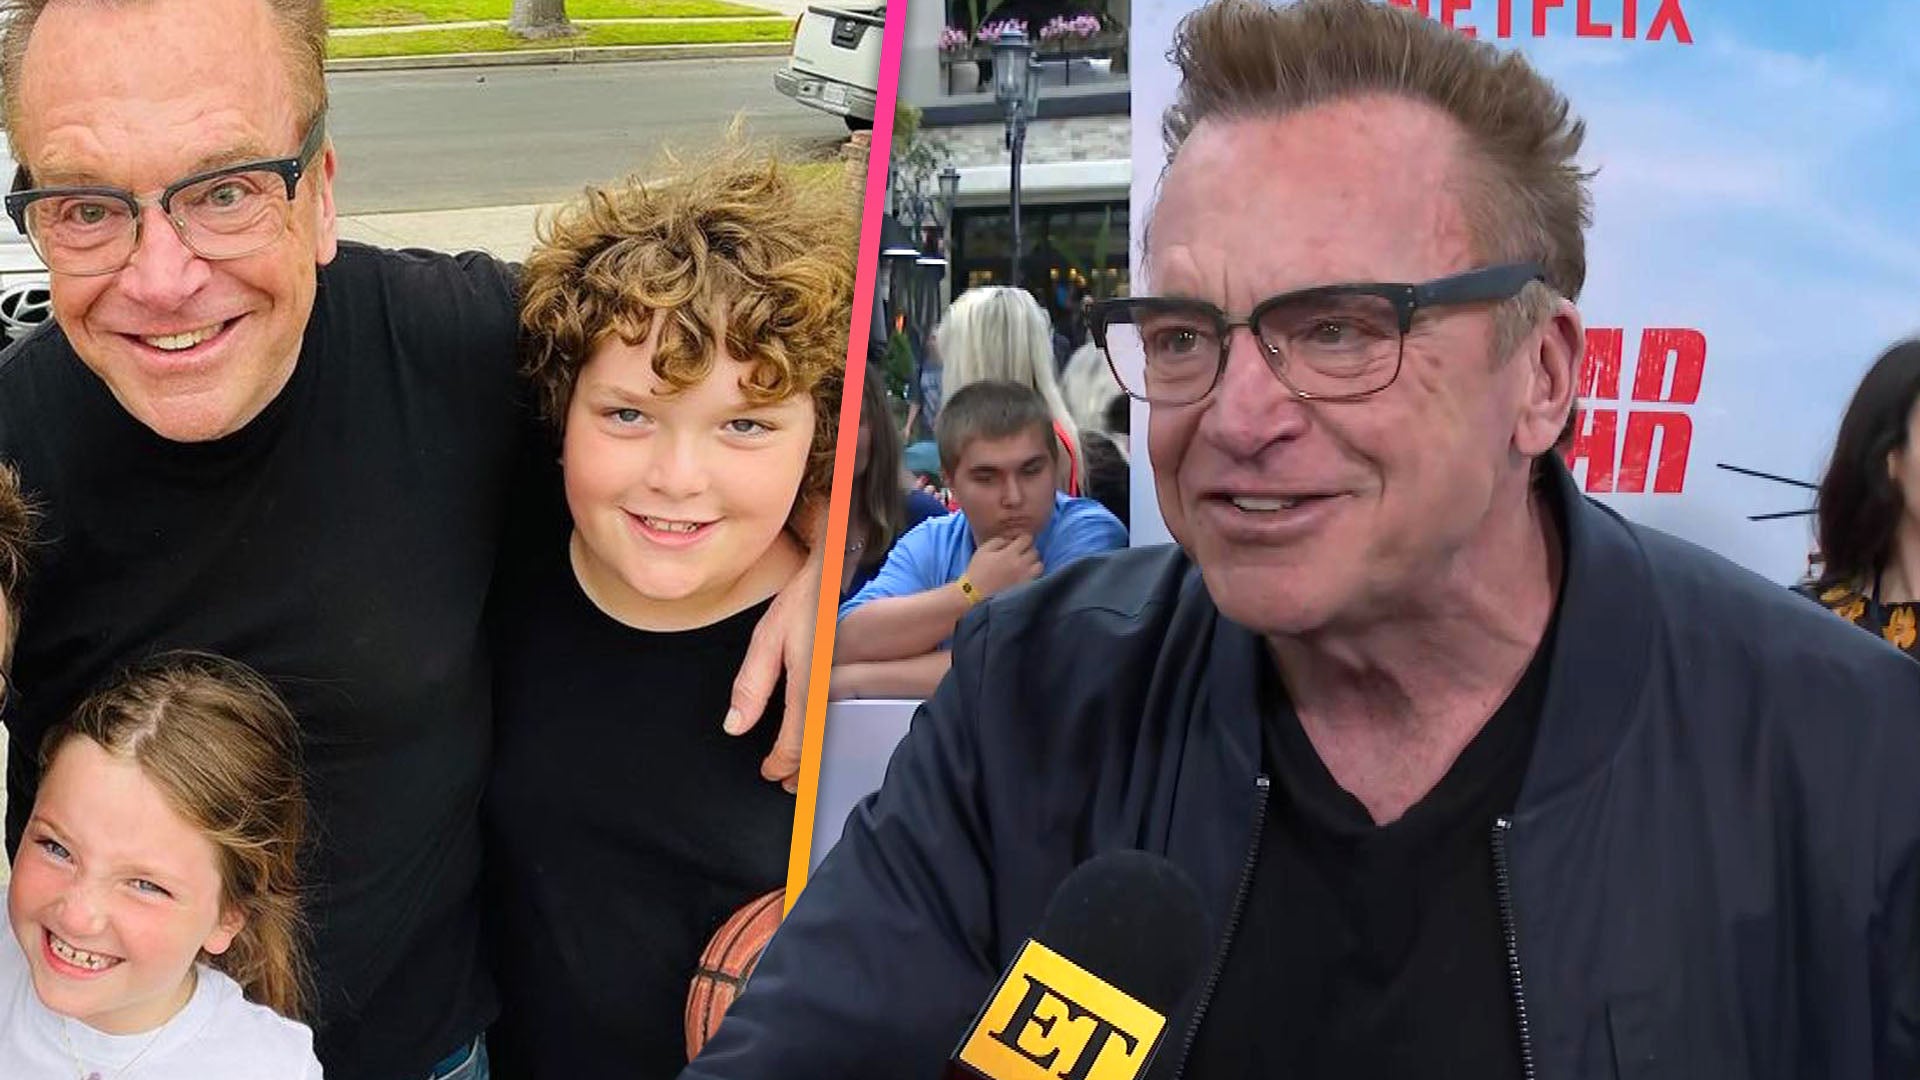 Tom Arnold Shares How Family Was Key in His Recovery After Suffering a Stroke (Exclusive)